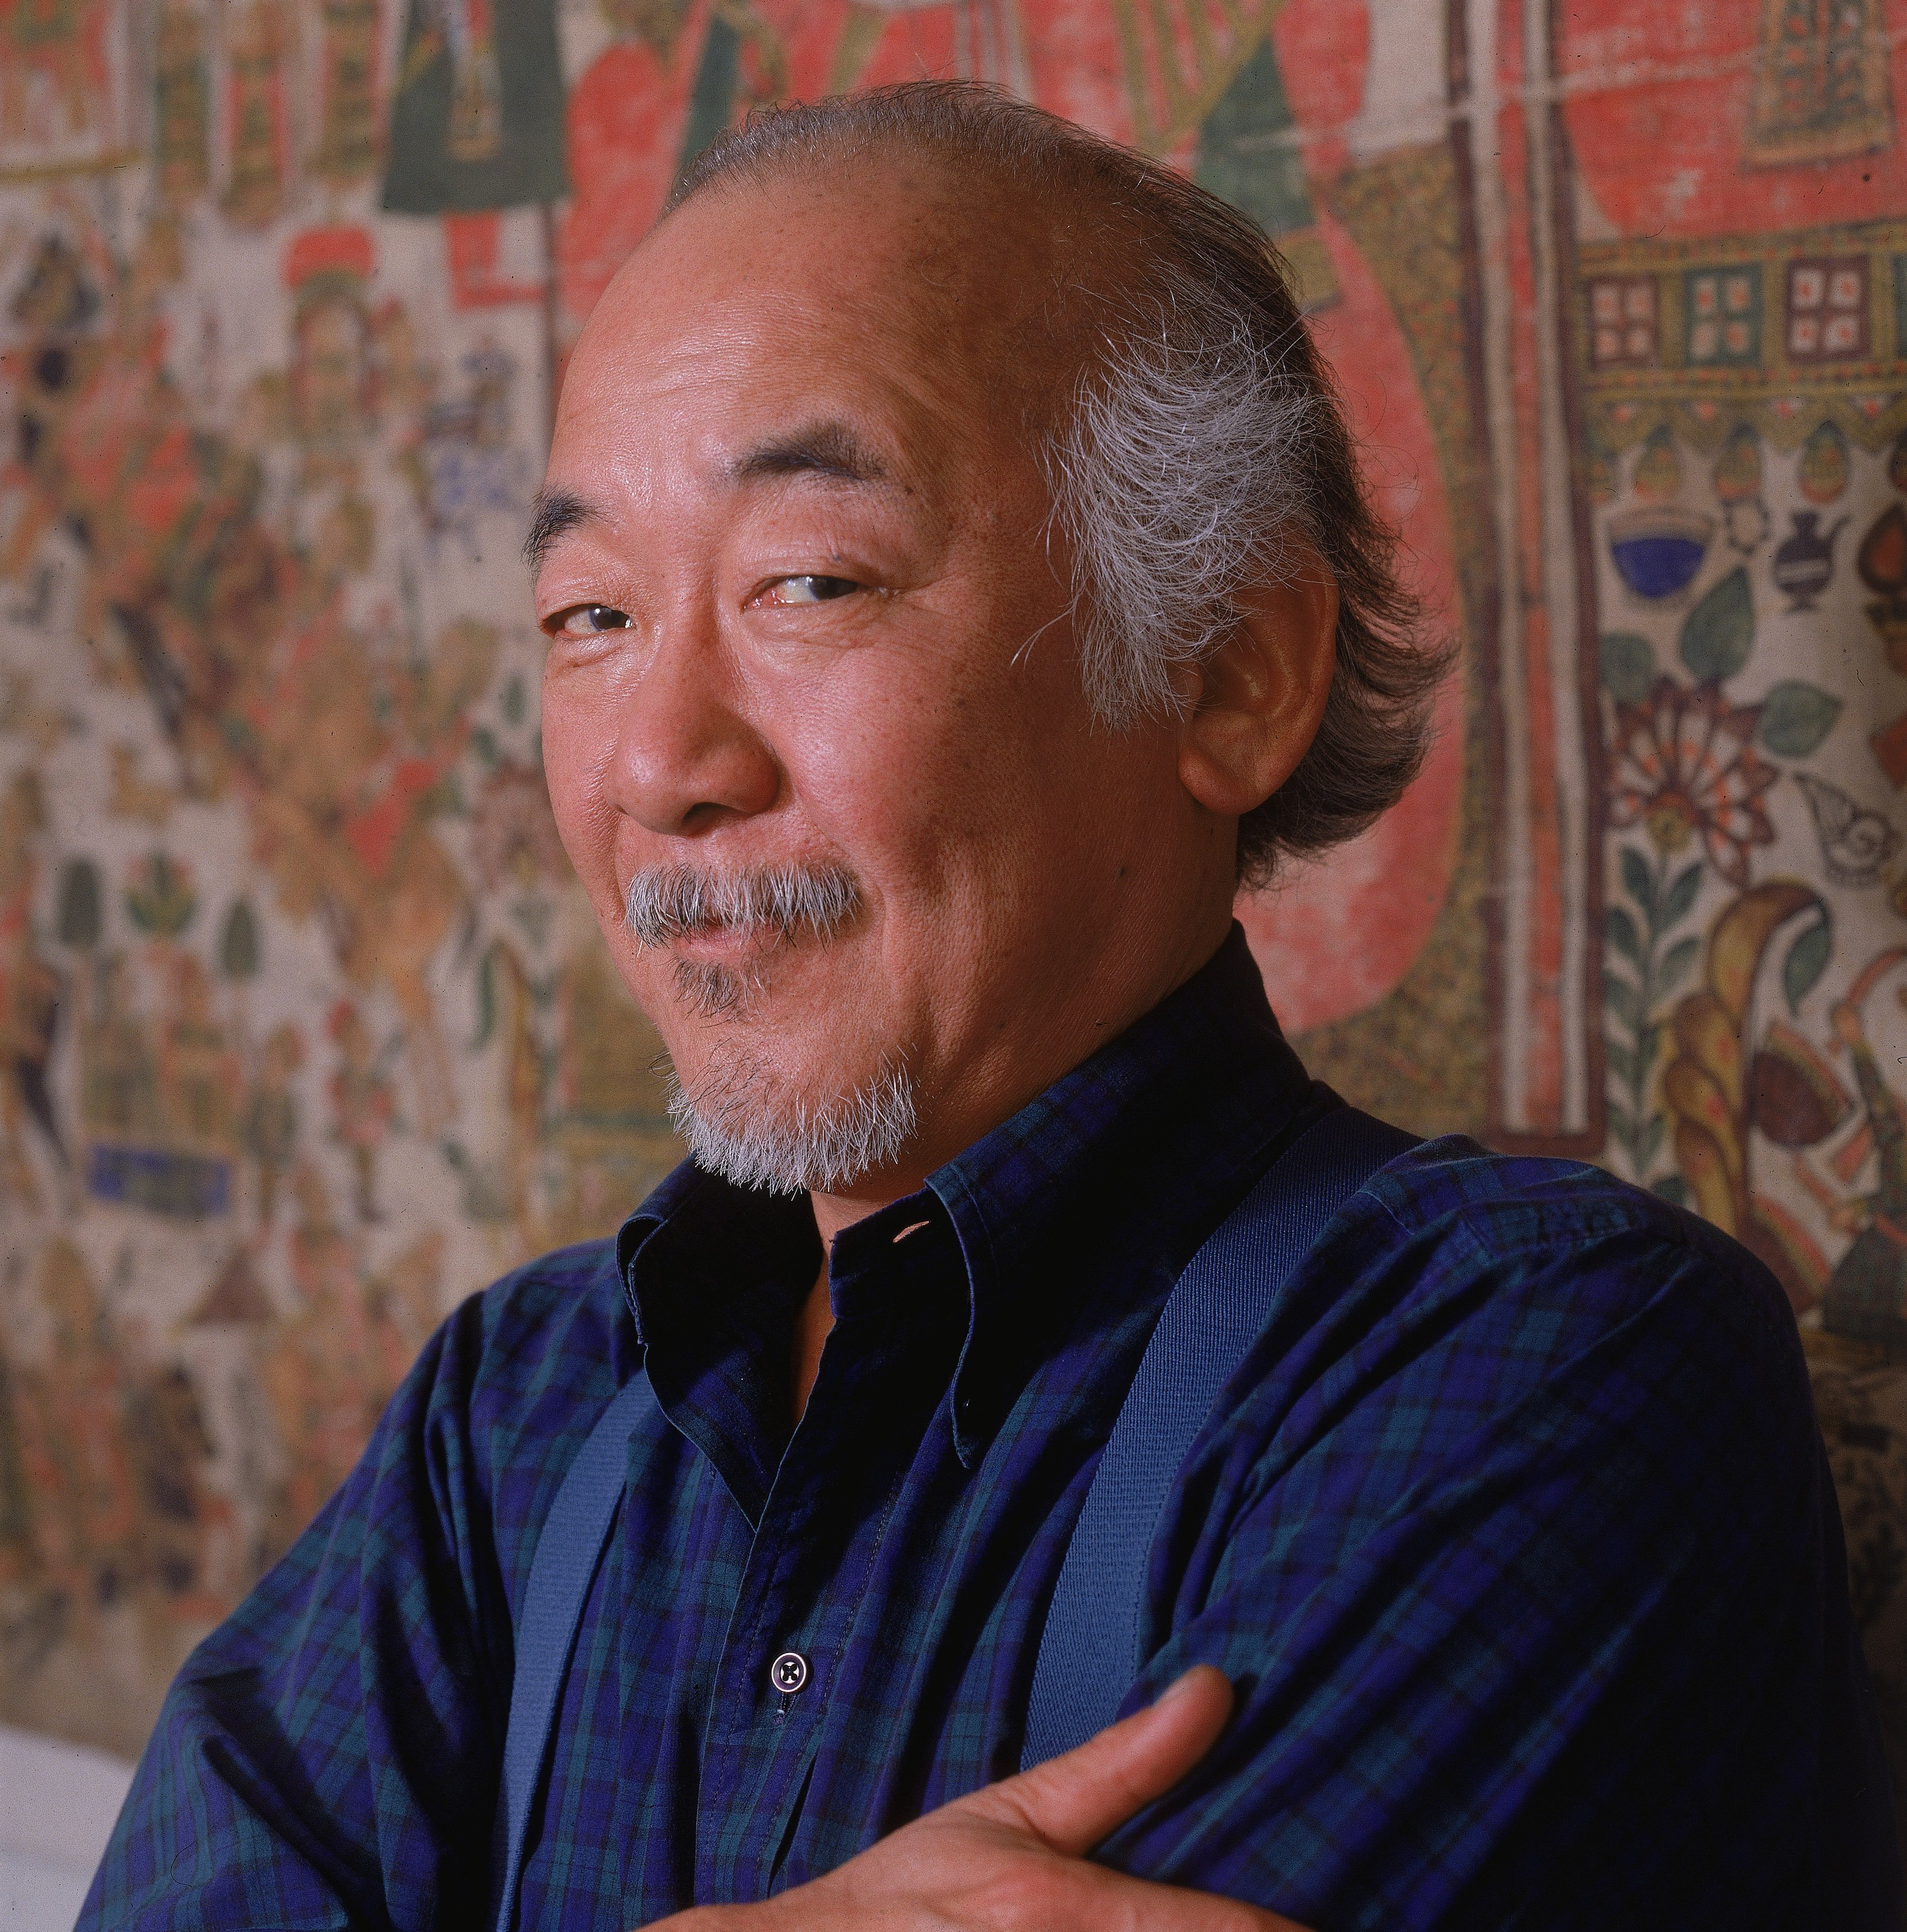 Comedian Pat Morita posing while standing against a tapestry, 1988. / Source: Getty Images